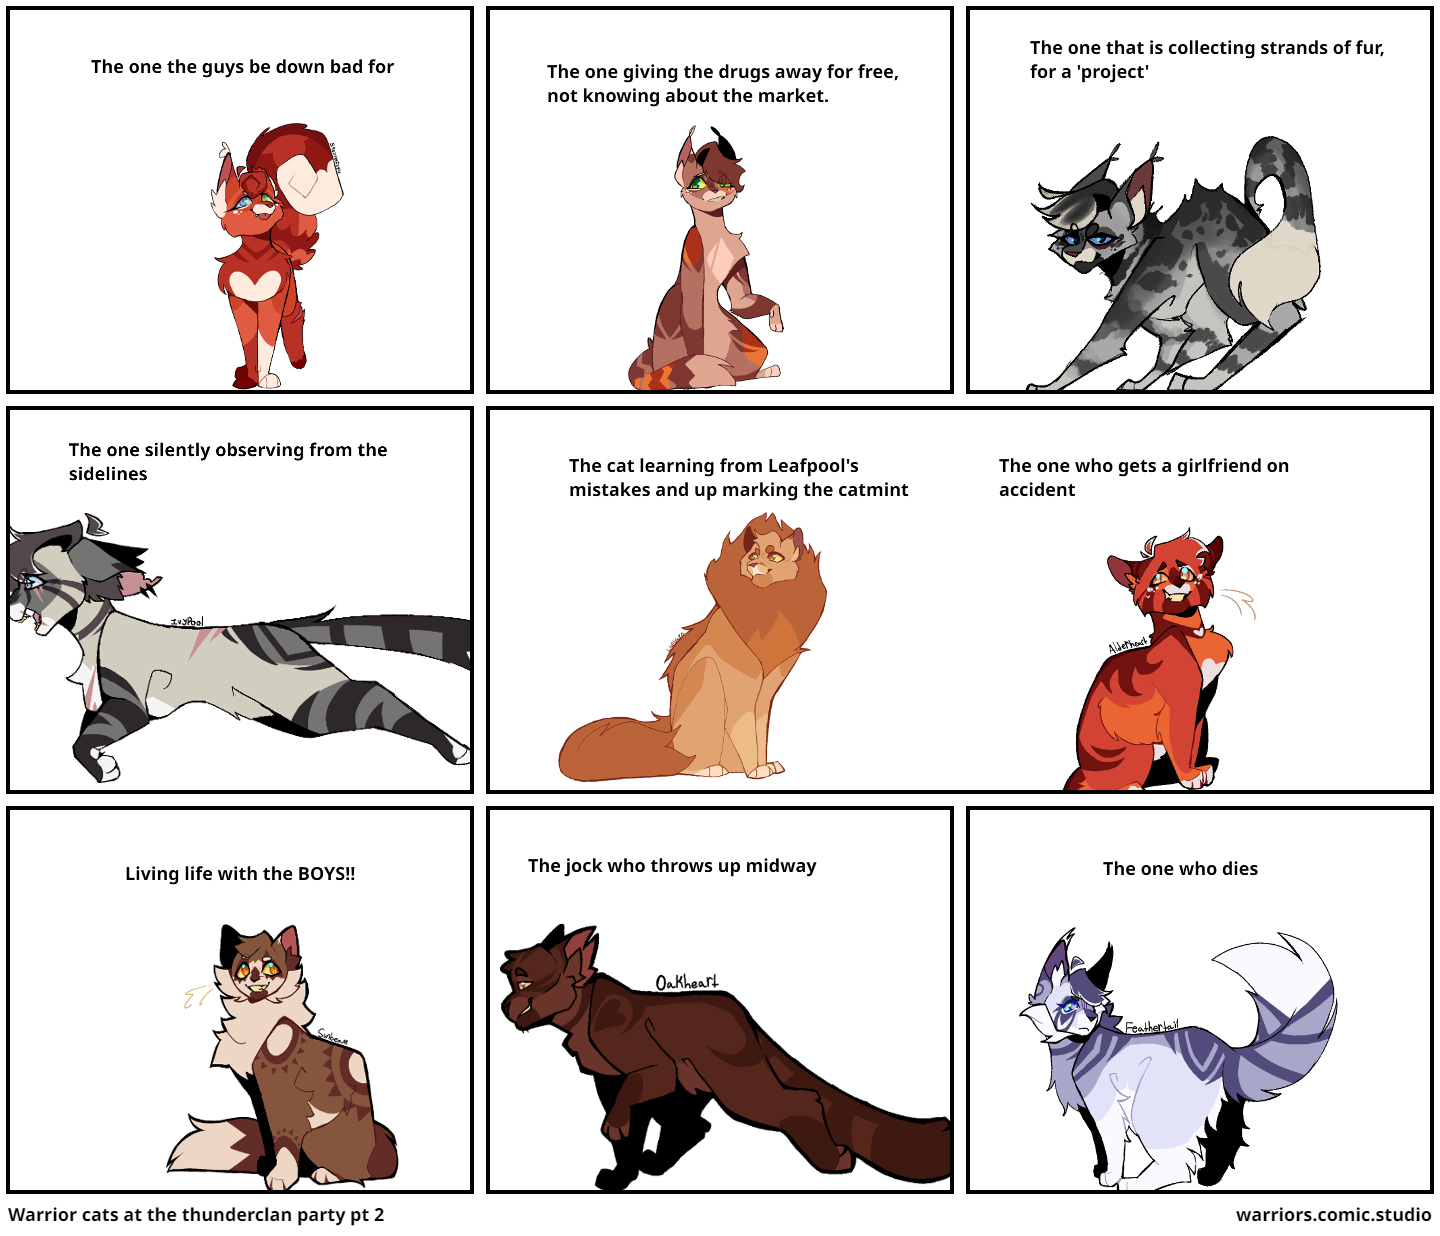 Warrior cats at the thunderclan party pt 2